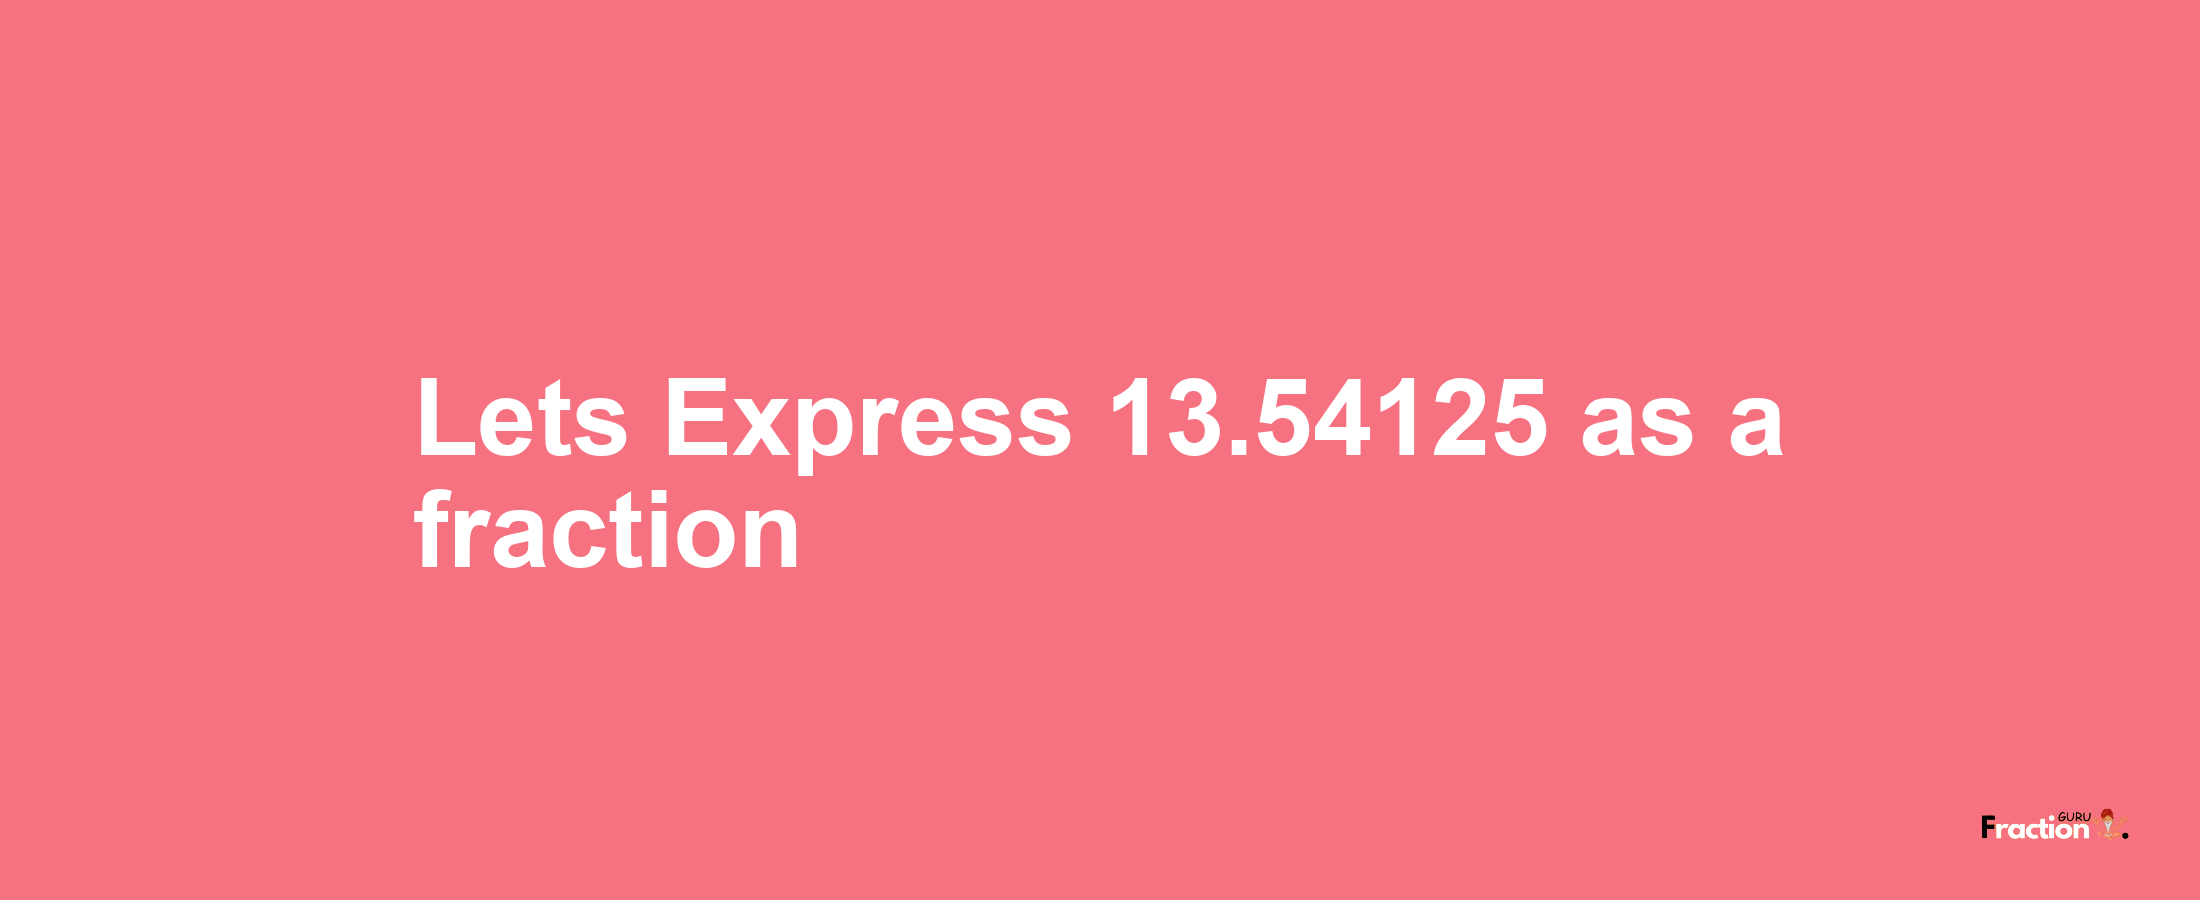 Lets Express 13.54125 as afraction